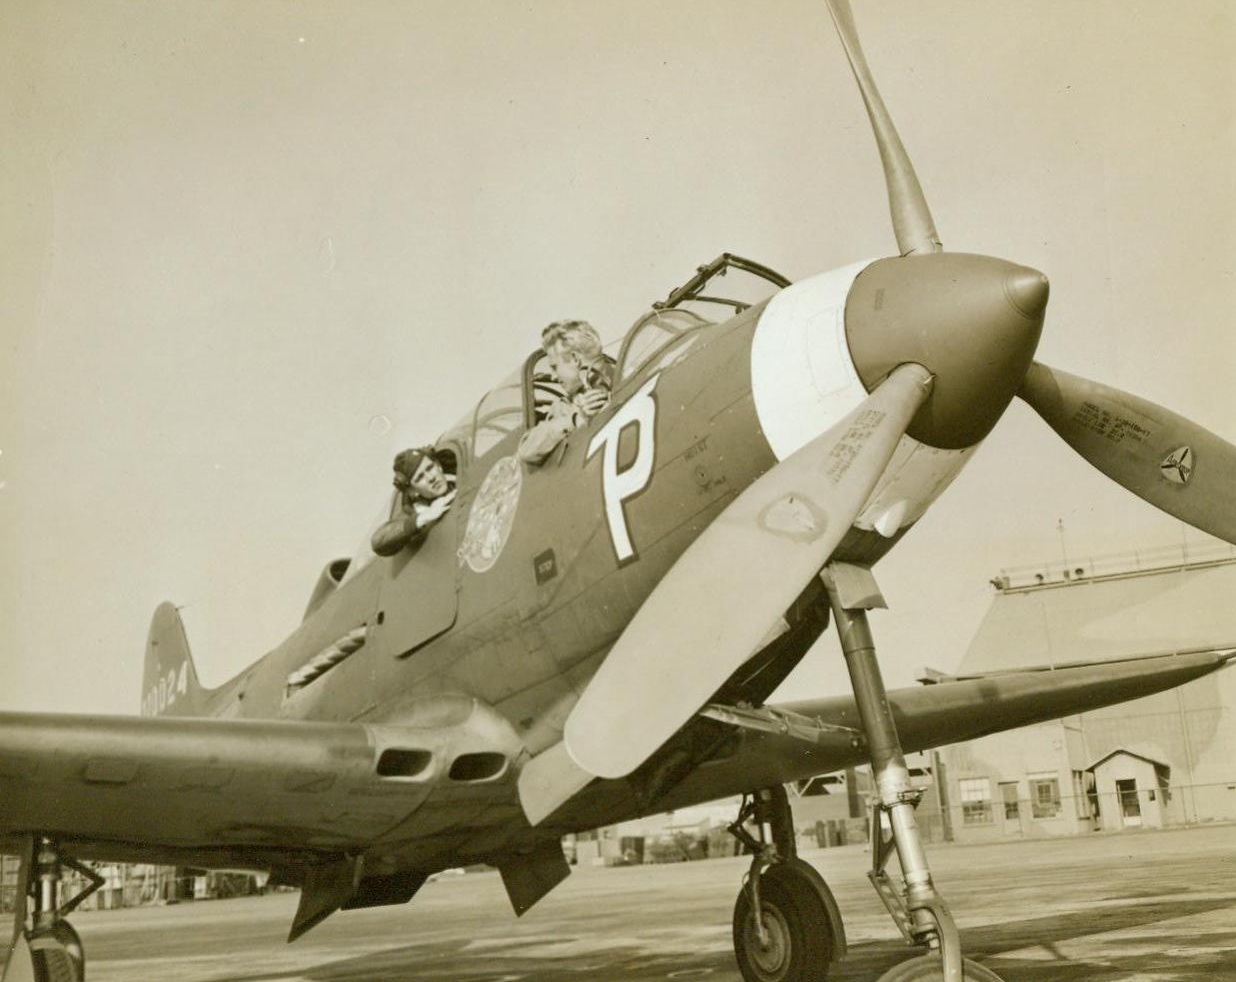 Aircobra Becomes "Hot" Trainer, 11/26/1943. Oakland, Calif. – The newest thing in racy Army trainers is the speedy  Bell Aircobra P-39 fighter, with a second cockpit cut in the ship’s nose so that both trainee and instructor can fly. In the front seat is Capt. Charles Tucker, who recently returned from China where he flew with the 14th Air Force. Lt. L.V. Andrews sits behind him 11/26/43 (ACME);